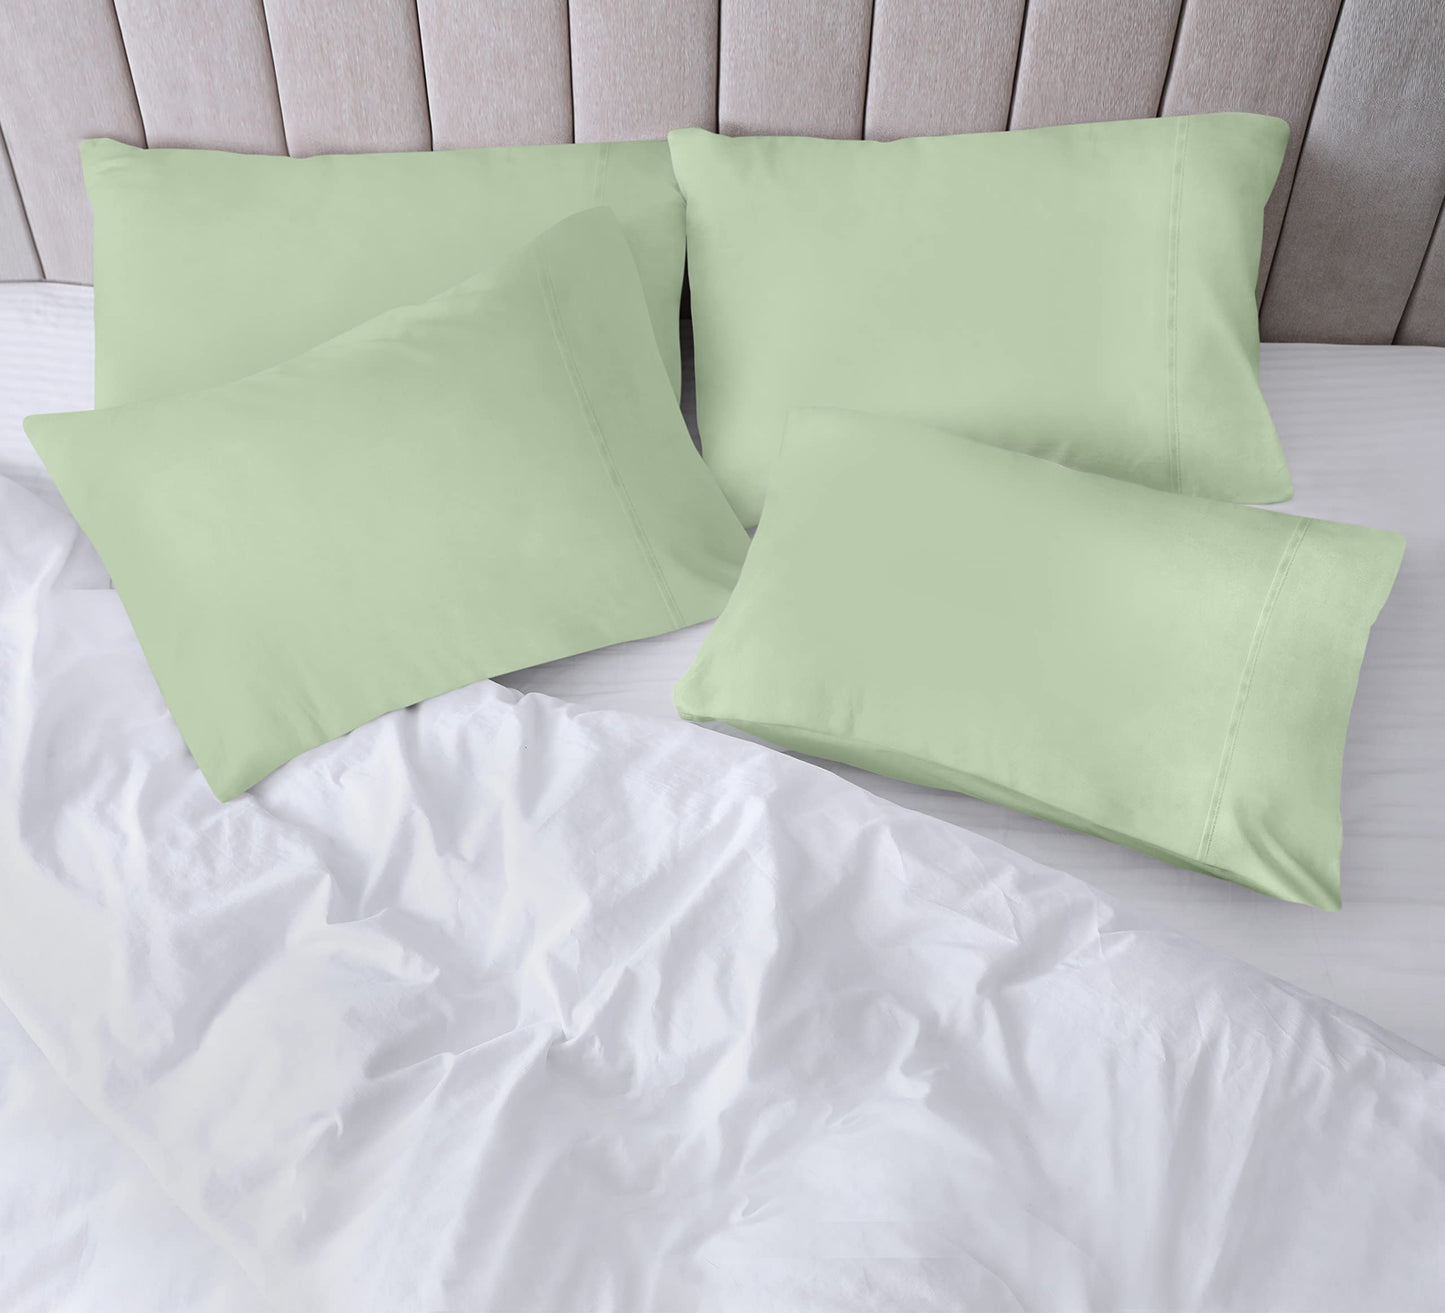 Utopia Bedding Queen Pillow Cases - 4 Pack - Envelope Closure - Soft Brushed Microfiber Fabric - Shrinkage and Fade Resistant Pillow Cases Queen Size 20 X 30 Inches (Queen, Sage)